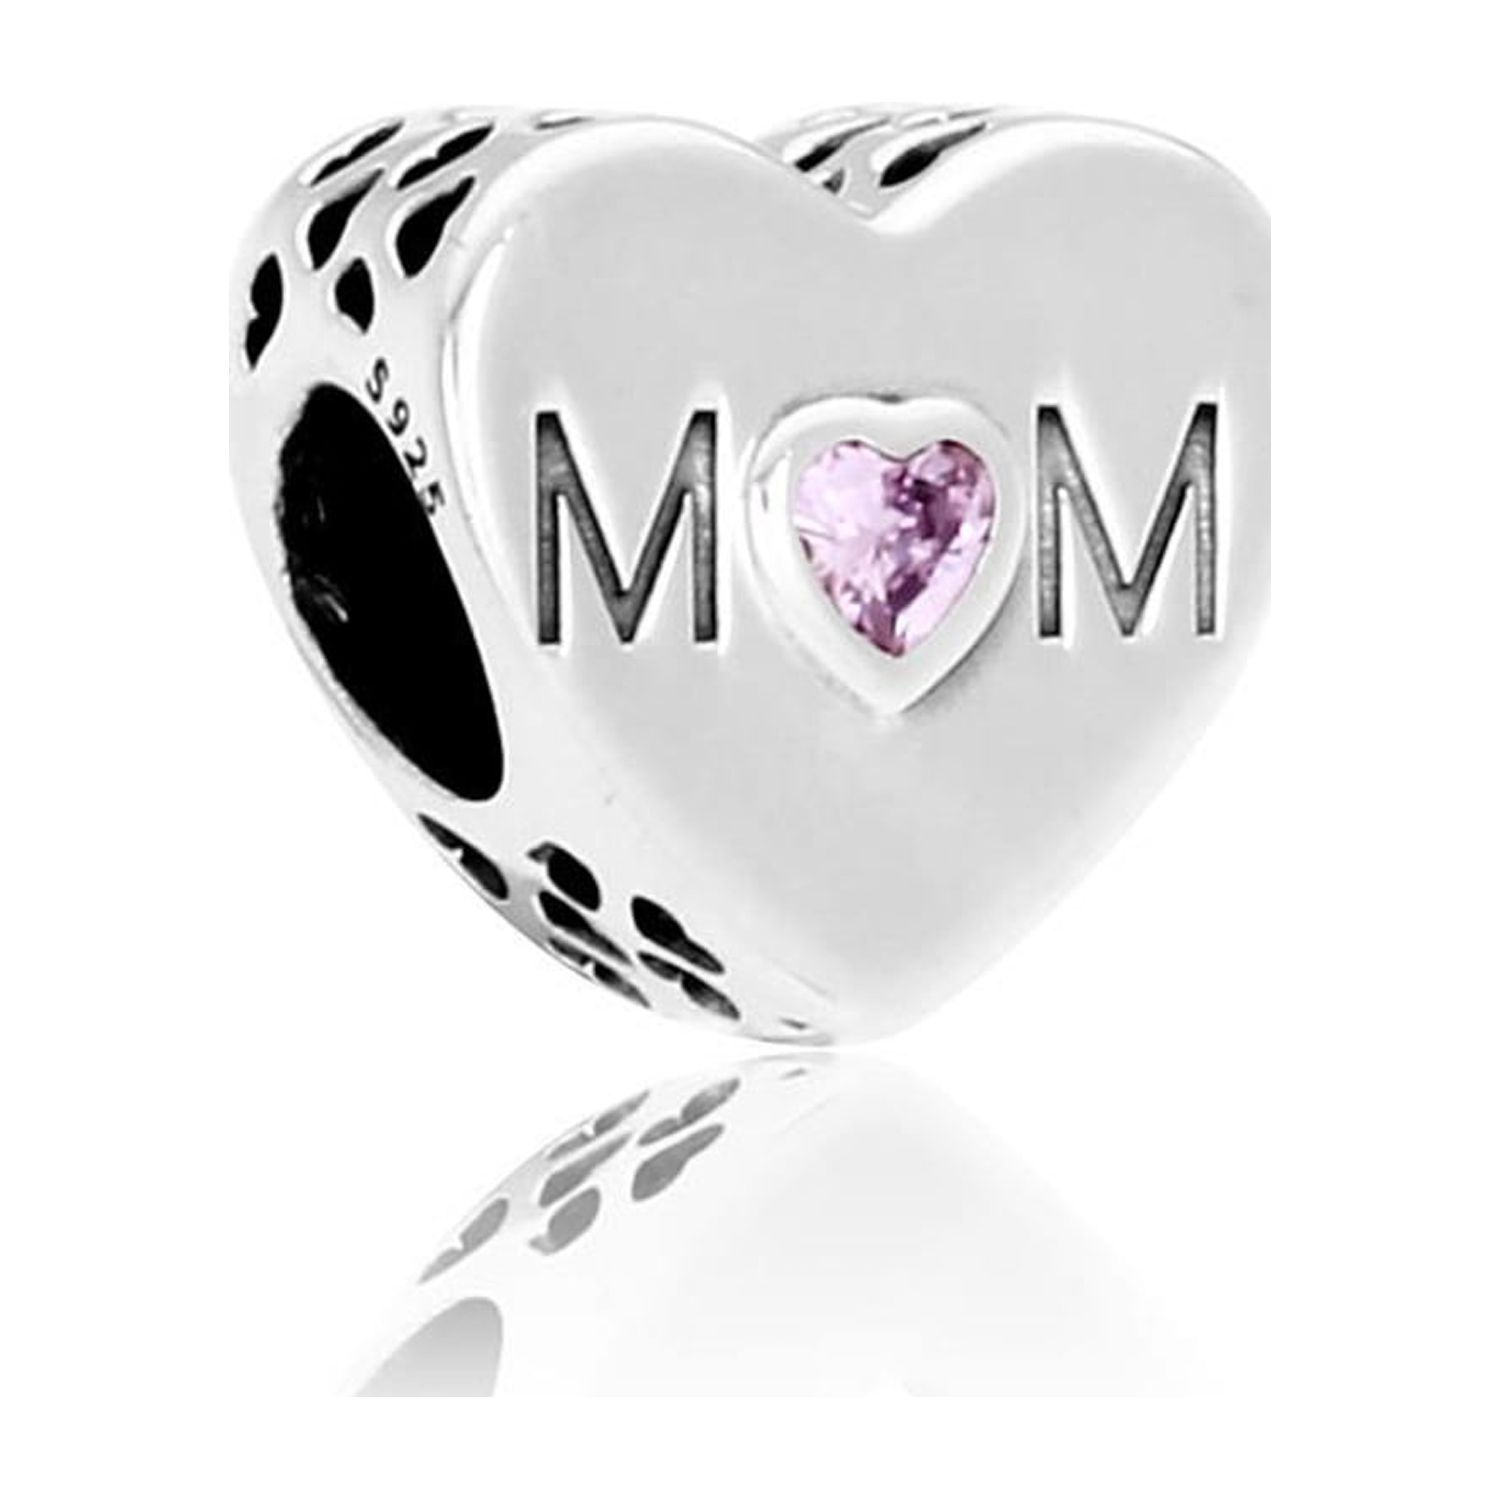 Pandora Mother Heart Charm with Purple Cubic Zirconia - image 1 of 2